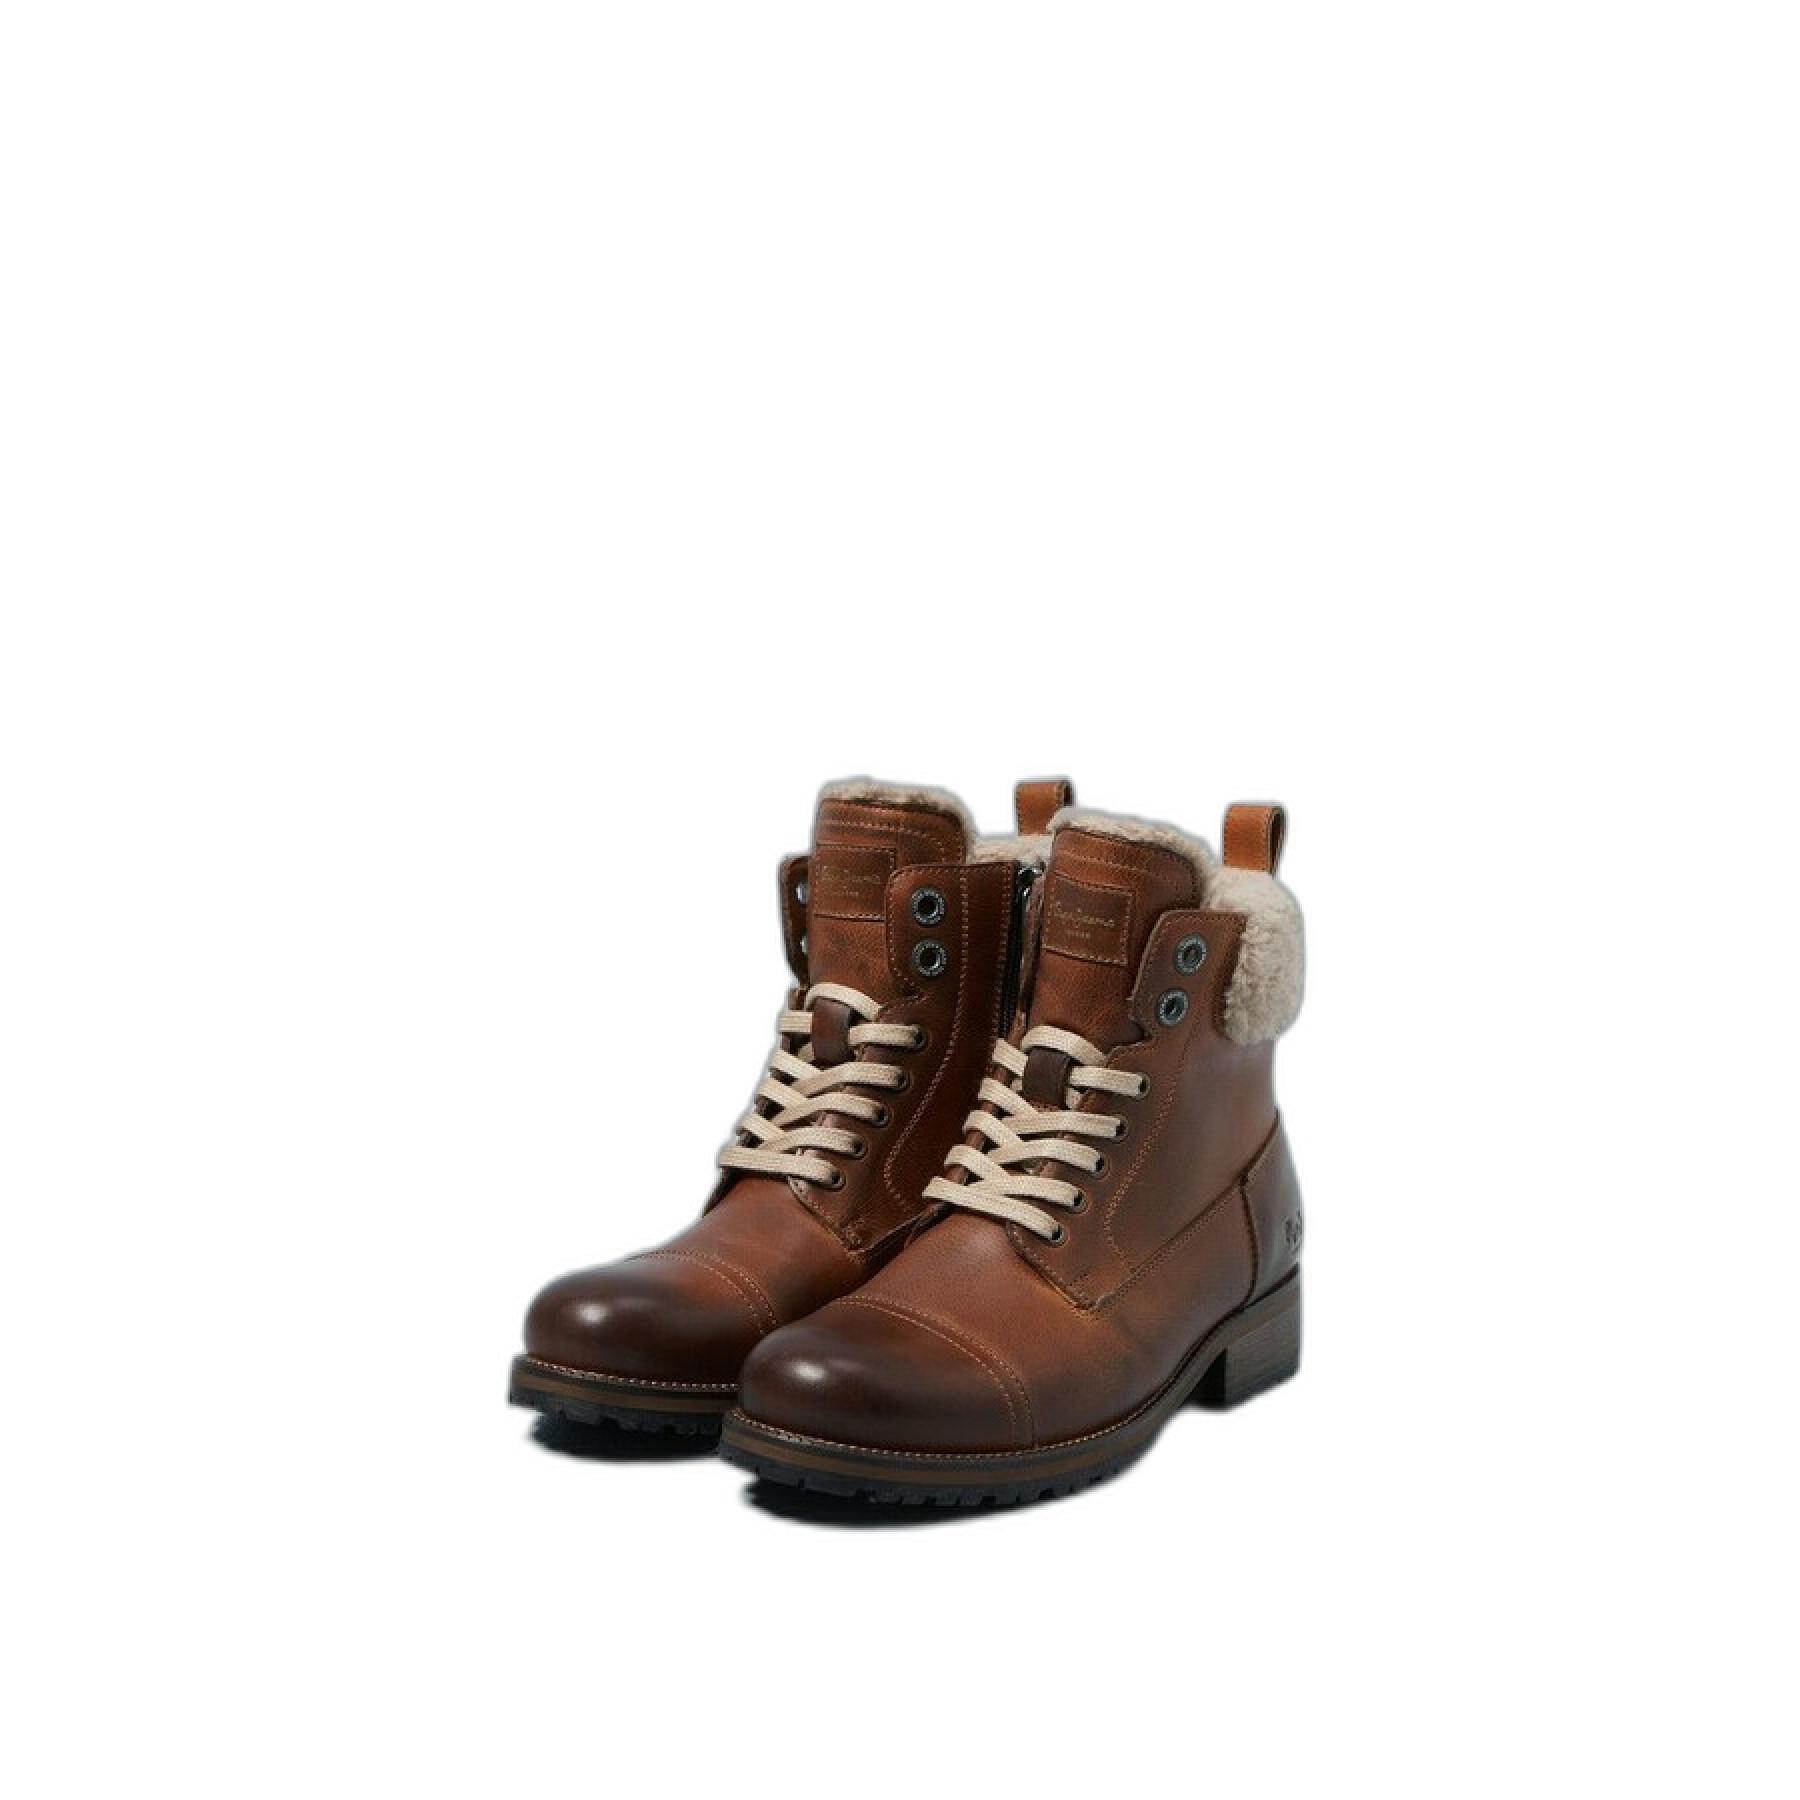 Women's boots Pepe Jeans Melting Warm